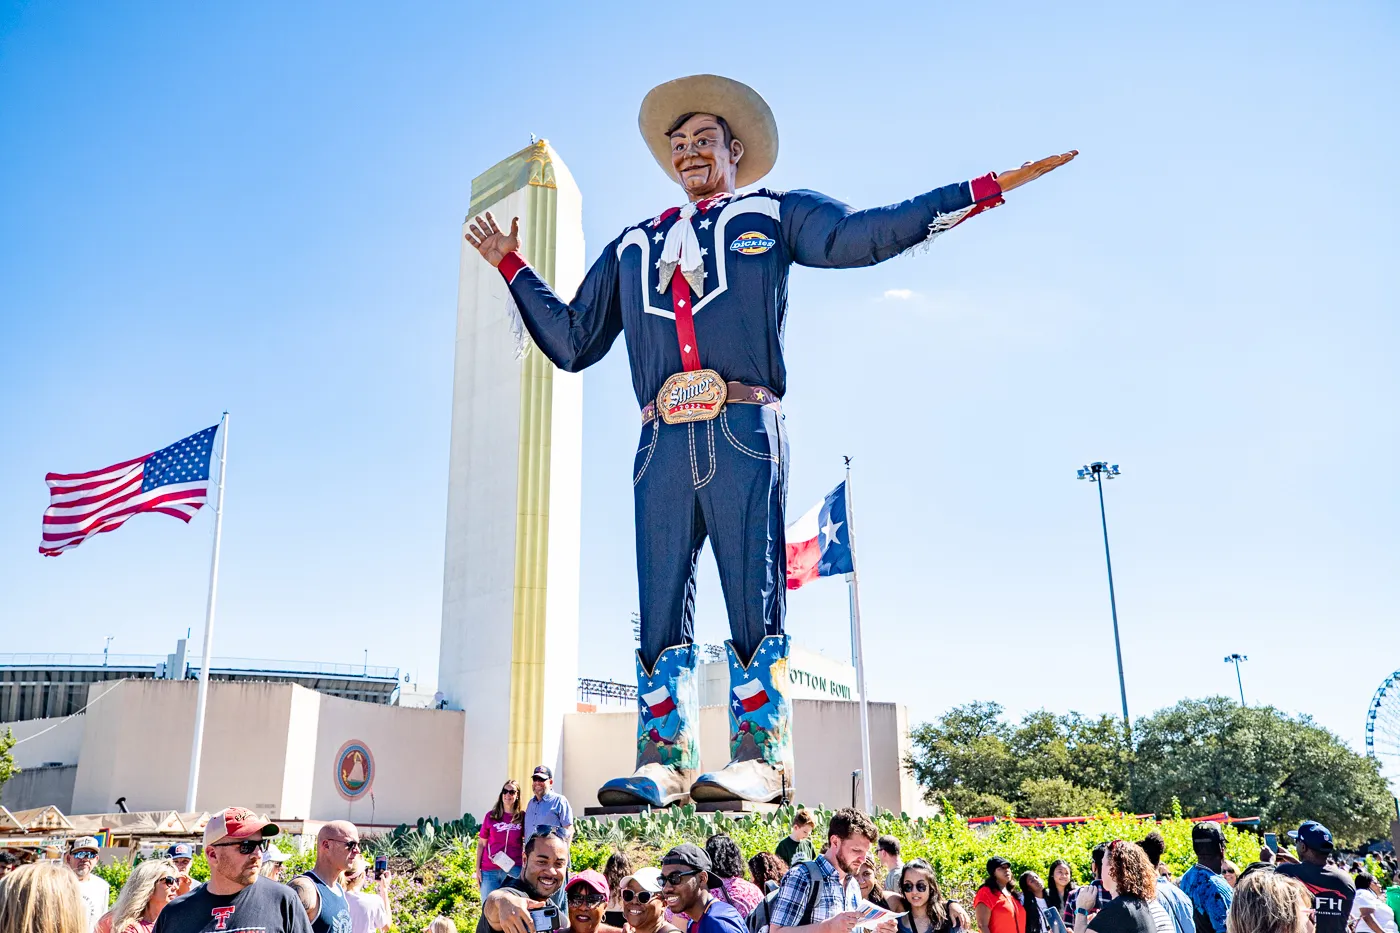 Big Tex at the State Fair of Texas in Dallas Texas. The world's tallest cowboy is the symbol of the Texas State Fair.